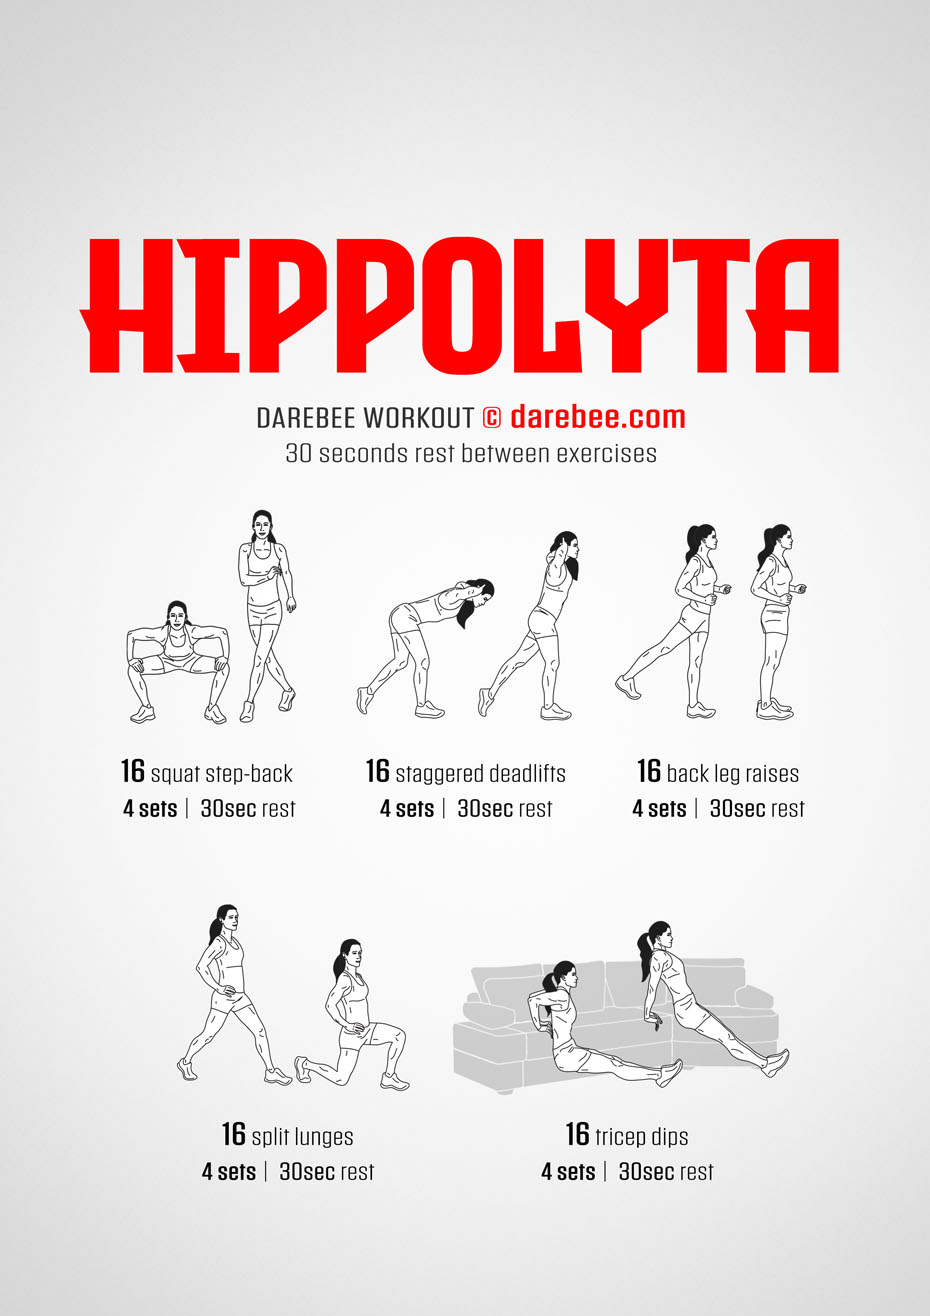 Hippolyta is a resp-based, no-equipment Darebee home-fitness strength workout that challenges the entire body.